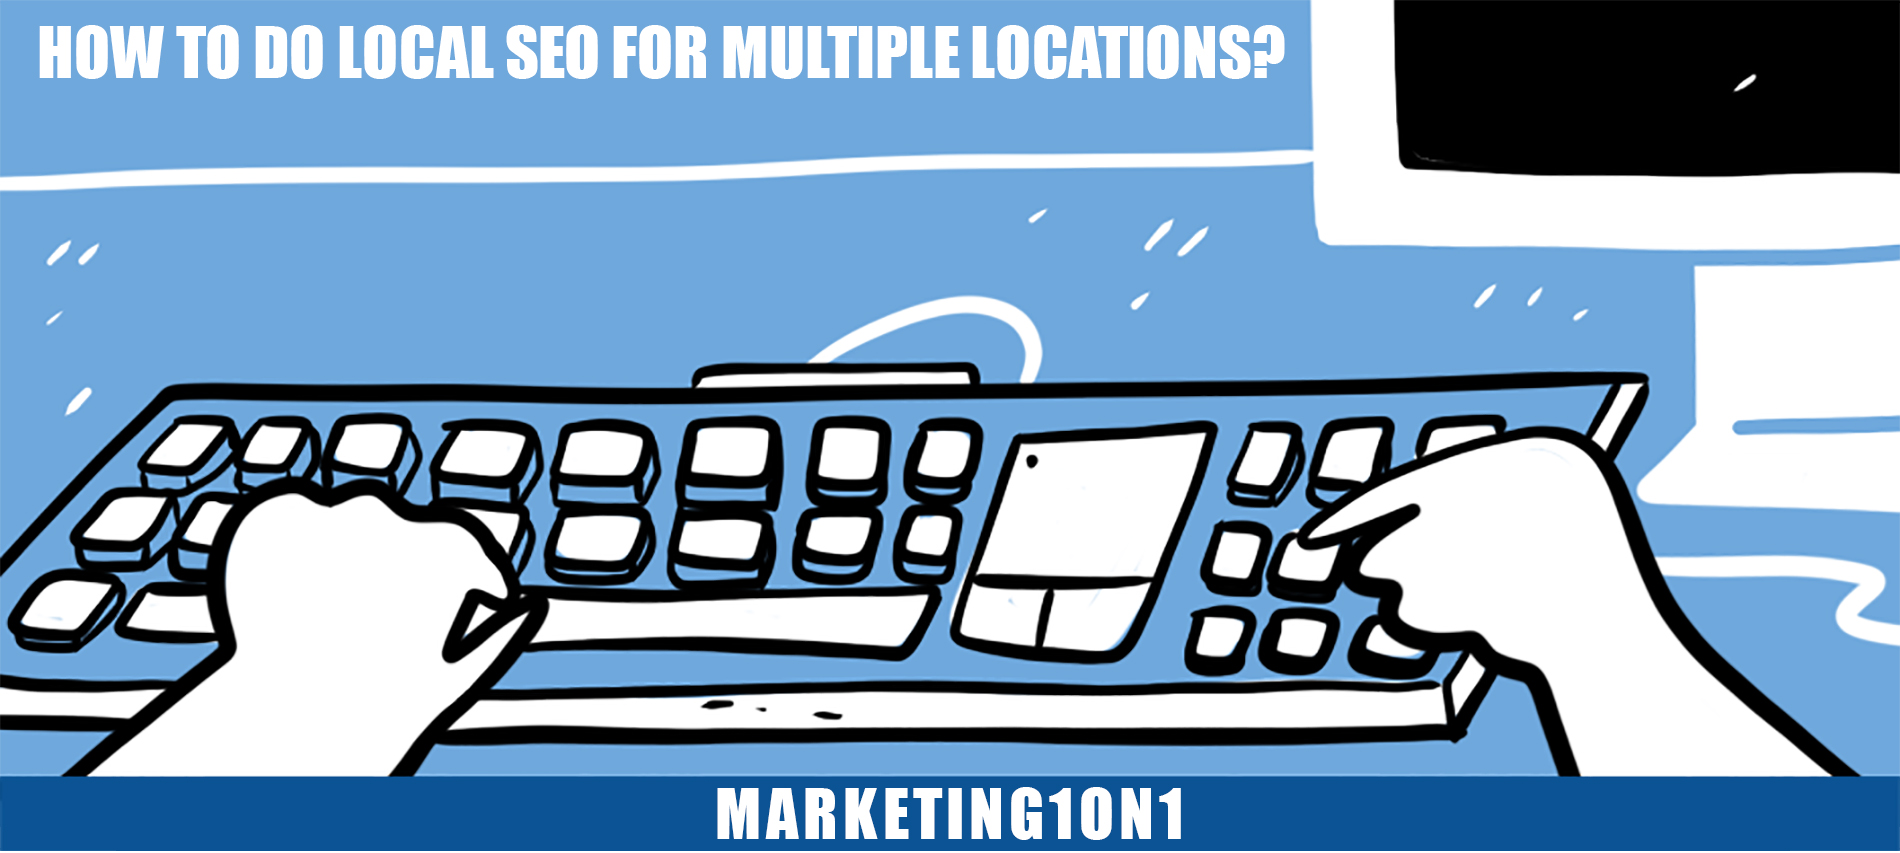 How to do local SEO for multiple locations?